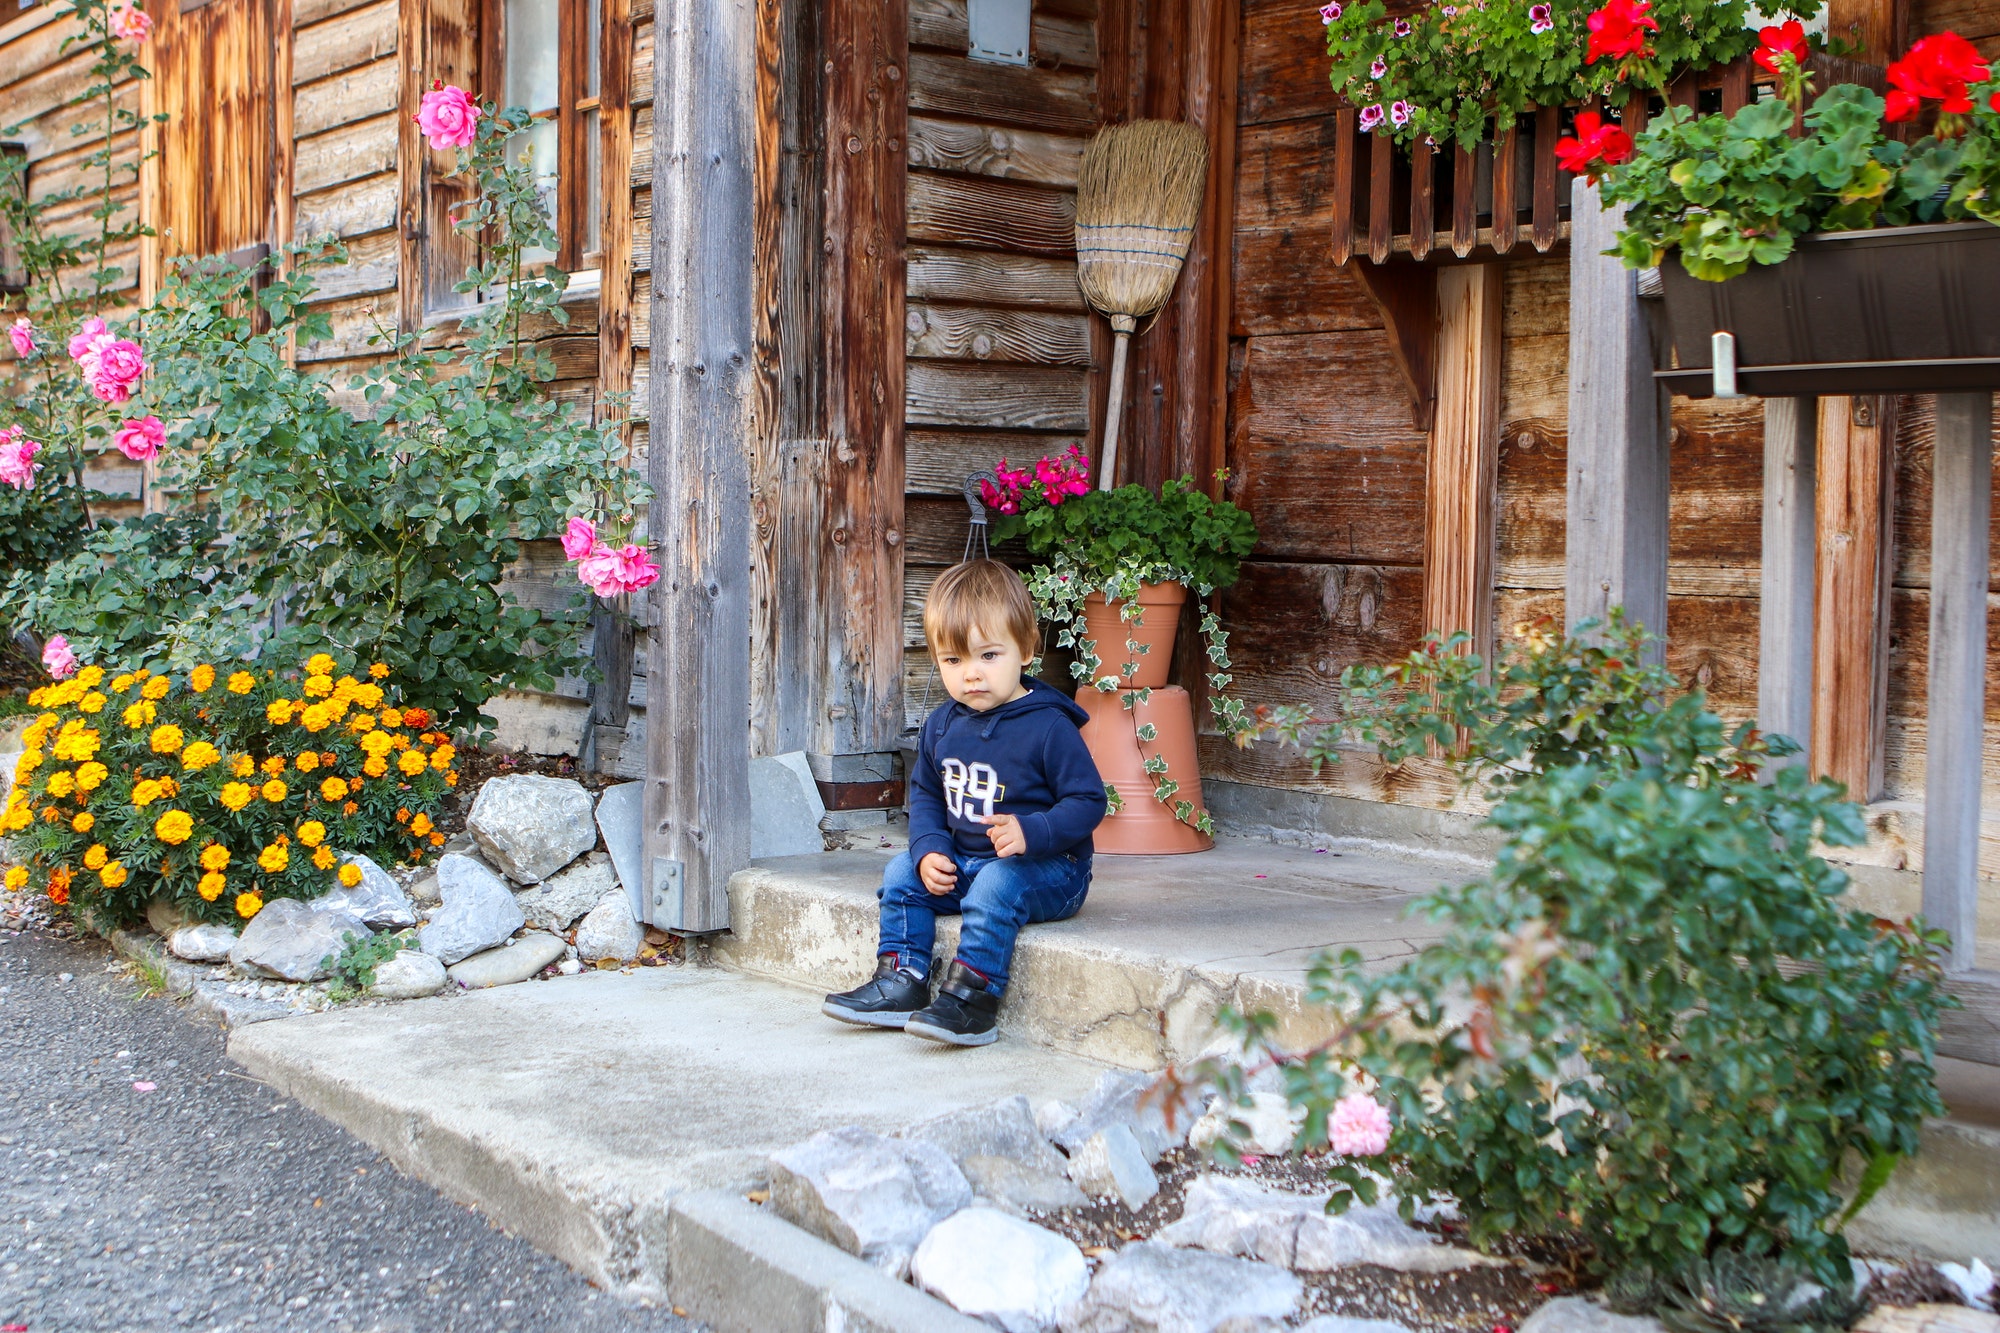 Cute little thoughtful boy sitting on the front porch of old vintage wooden house surrounded by